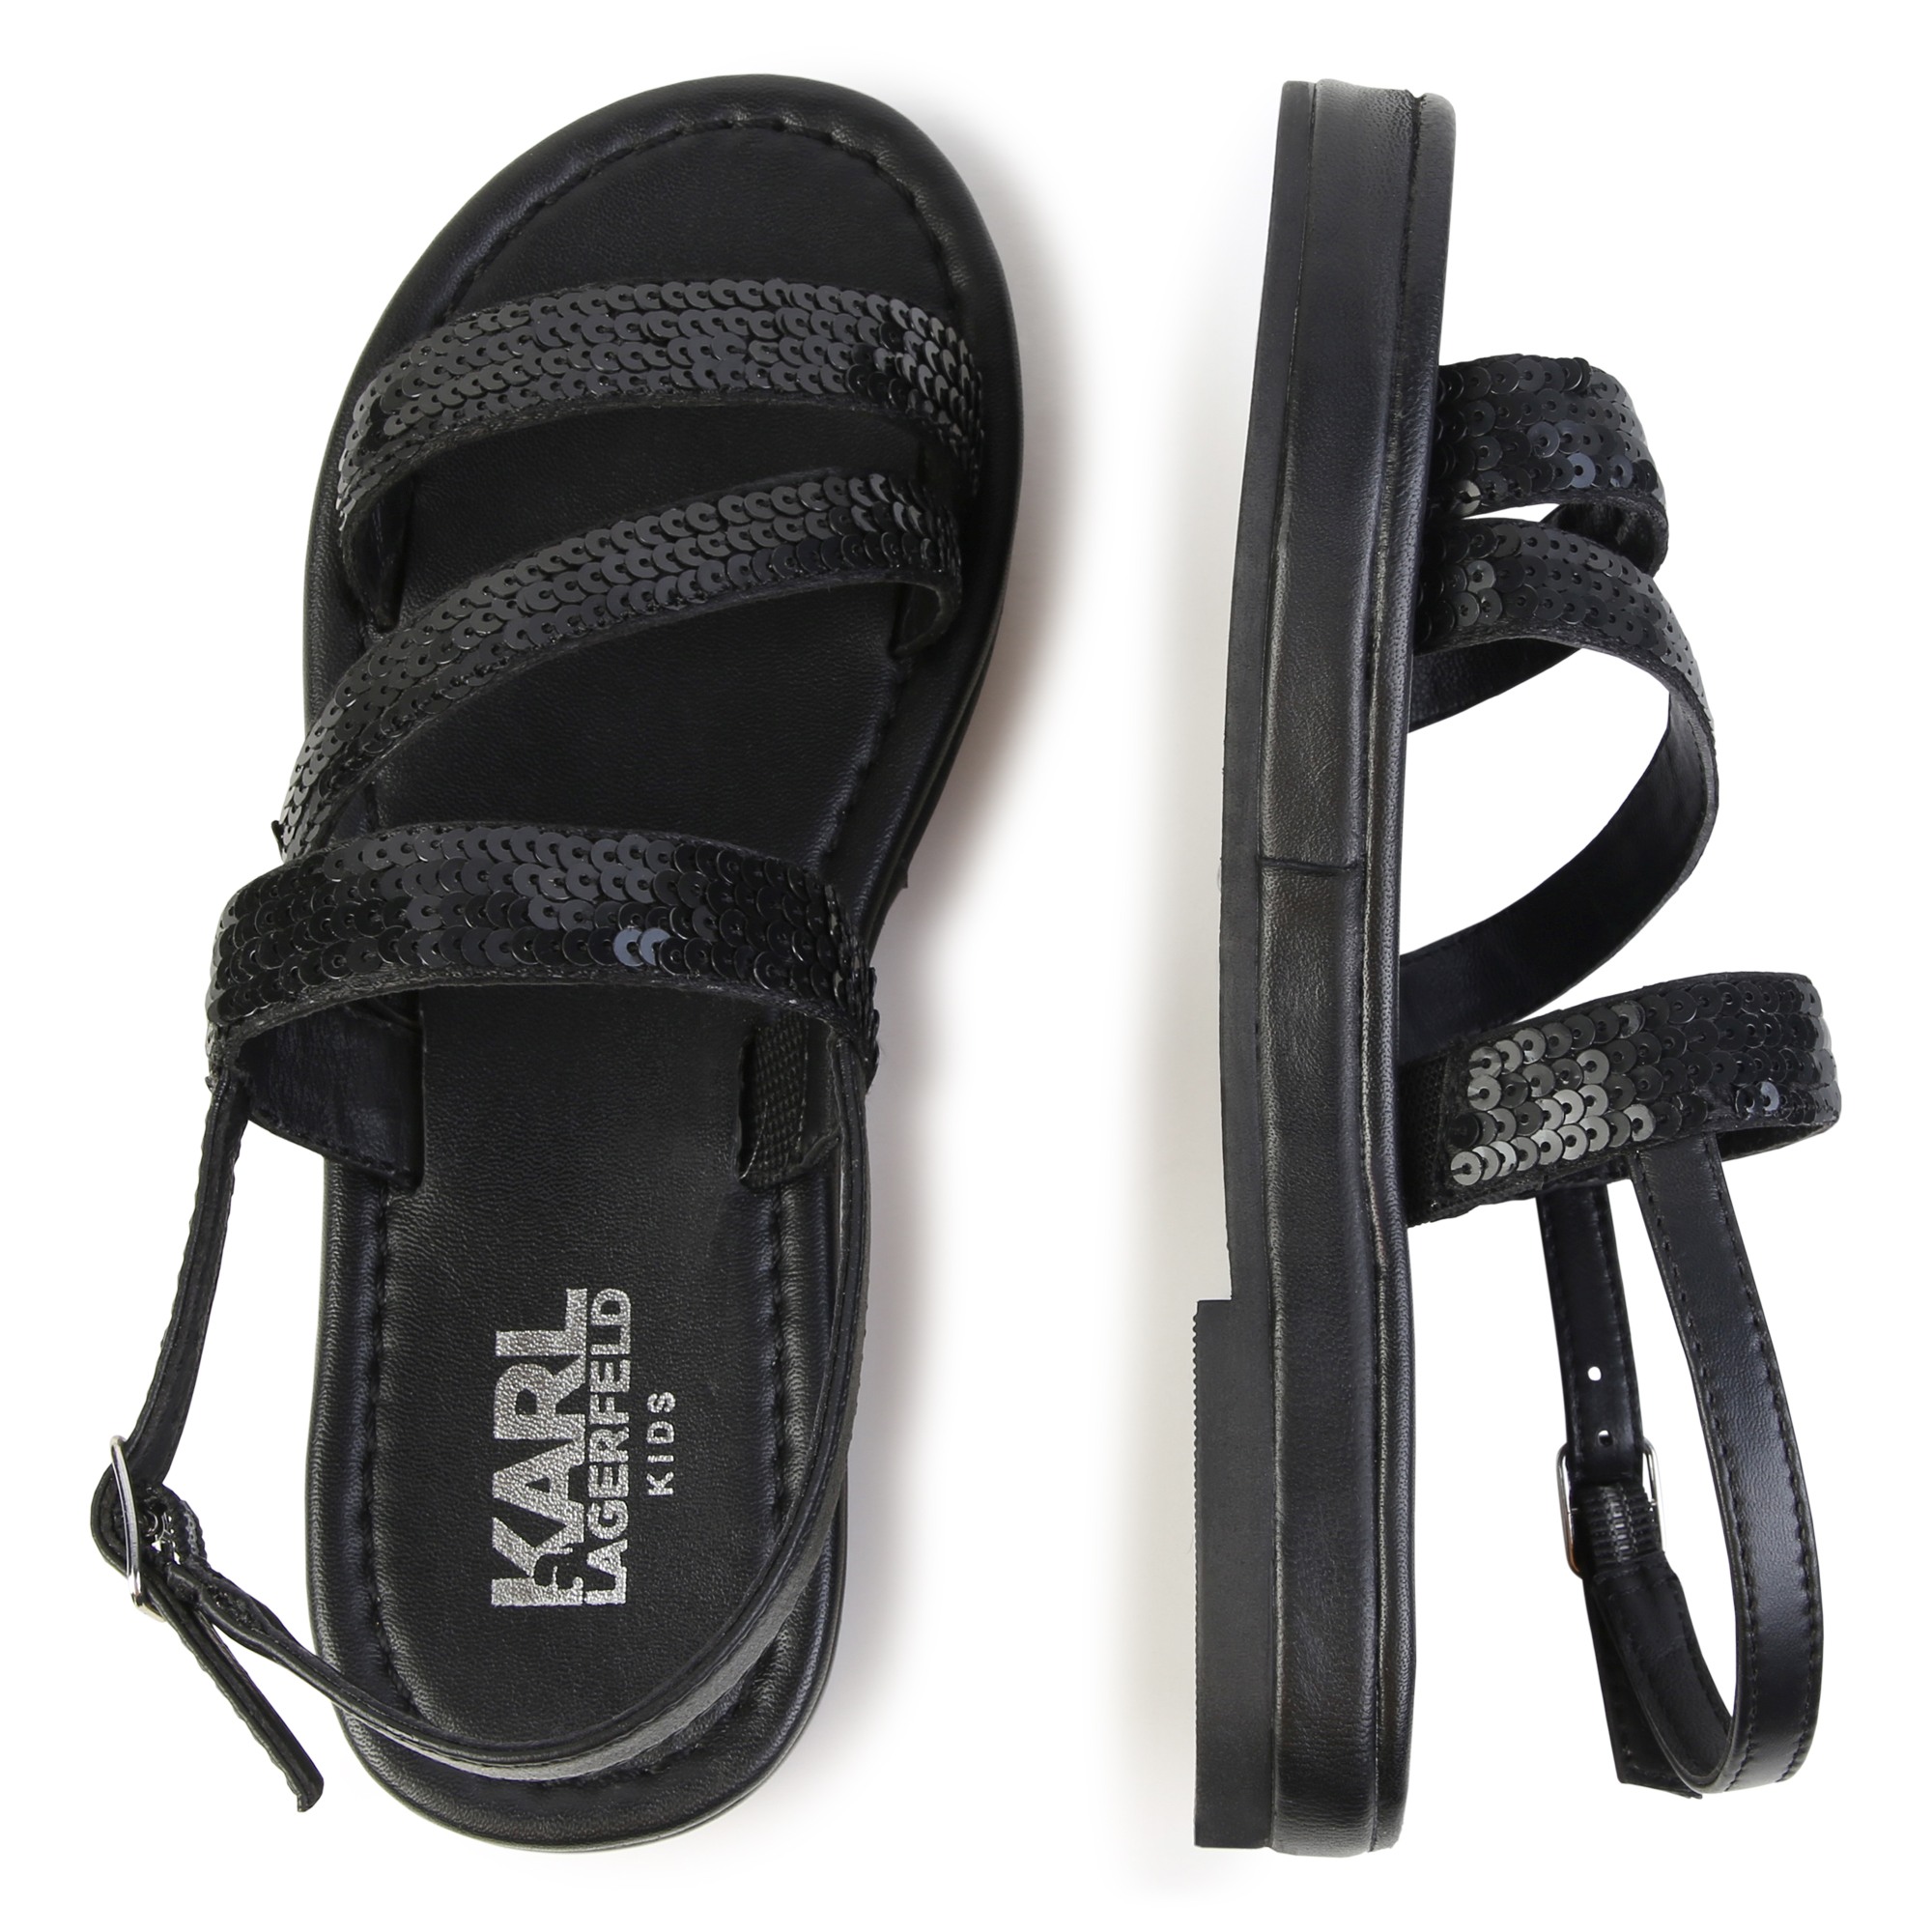 Sequined leather sandals KARL LAGERFELD KIDS for GIRL